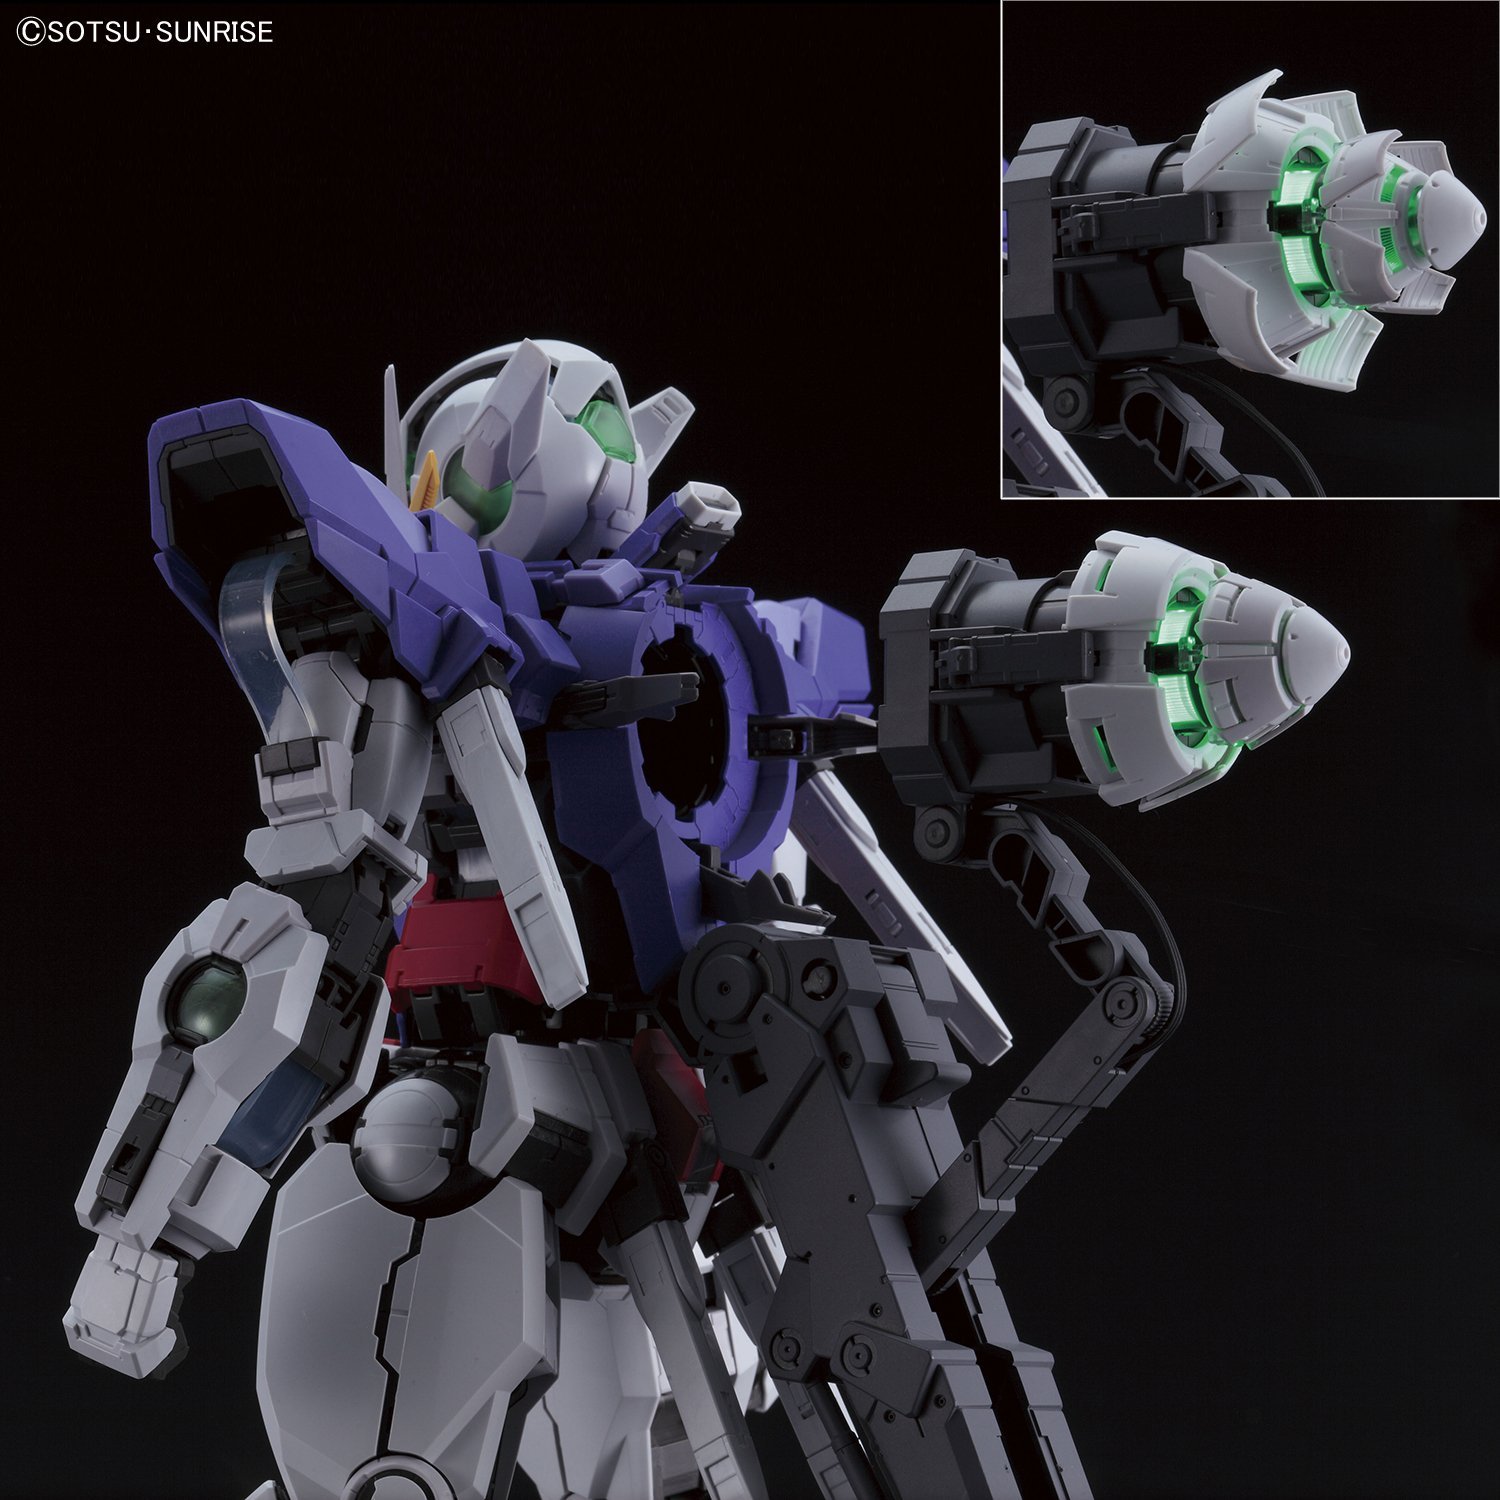 Bandai 1/60 PG exia picture 6 - GN particles supported [00 10 anniversary]